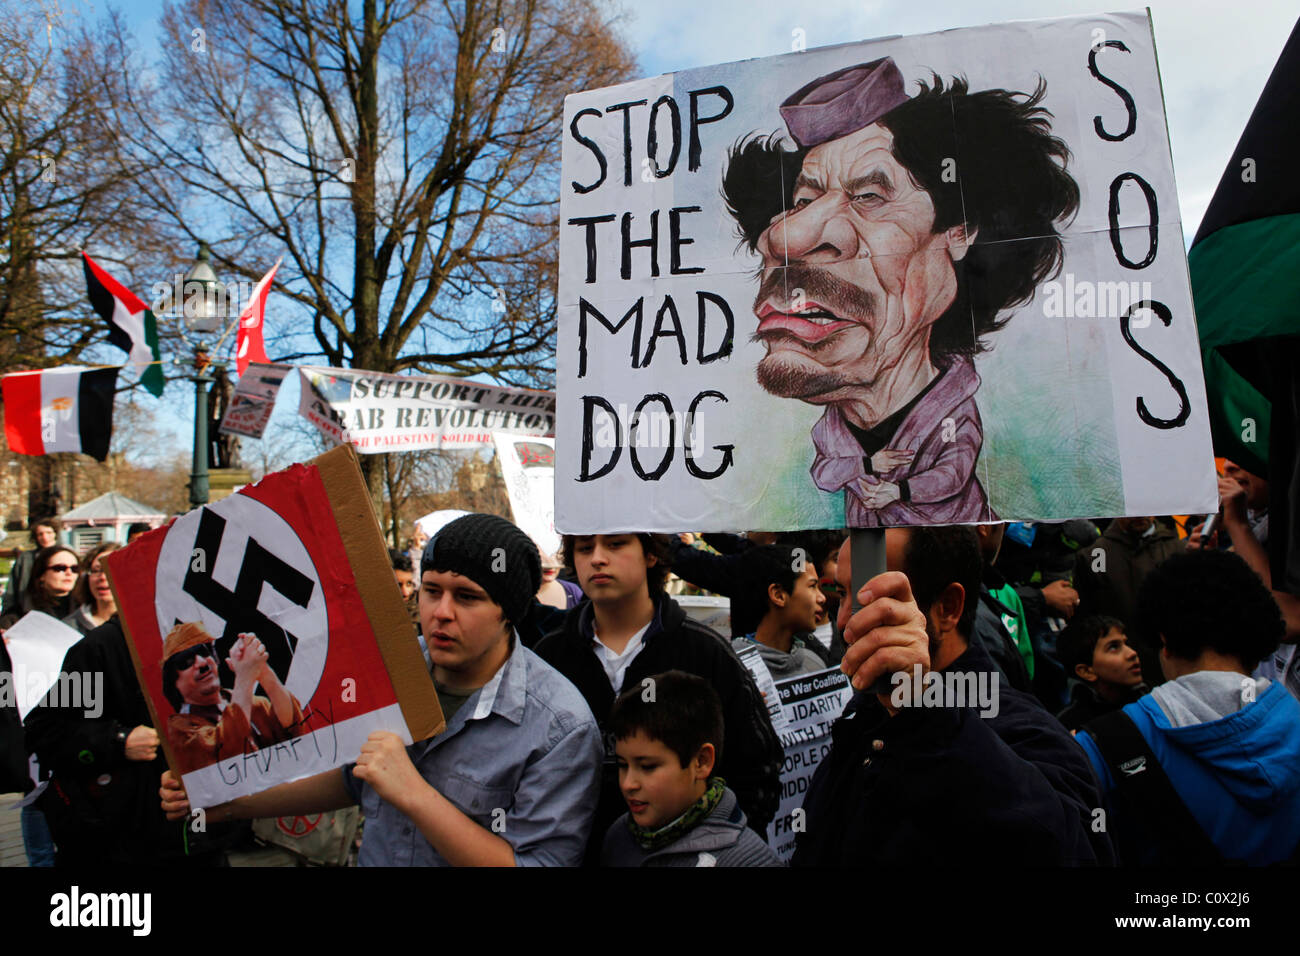 Anti-Gaddafi signs are held up at a demonstration in support of the 2011 Arab revolutions in Edinburgh, Scotland. Stock Photo